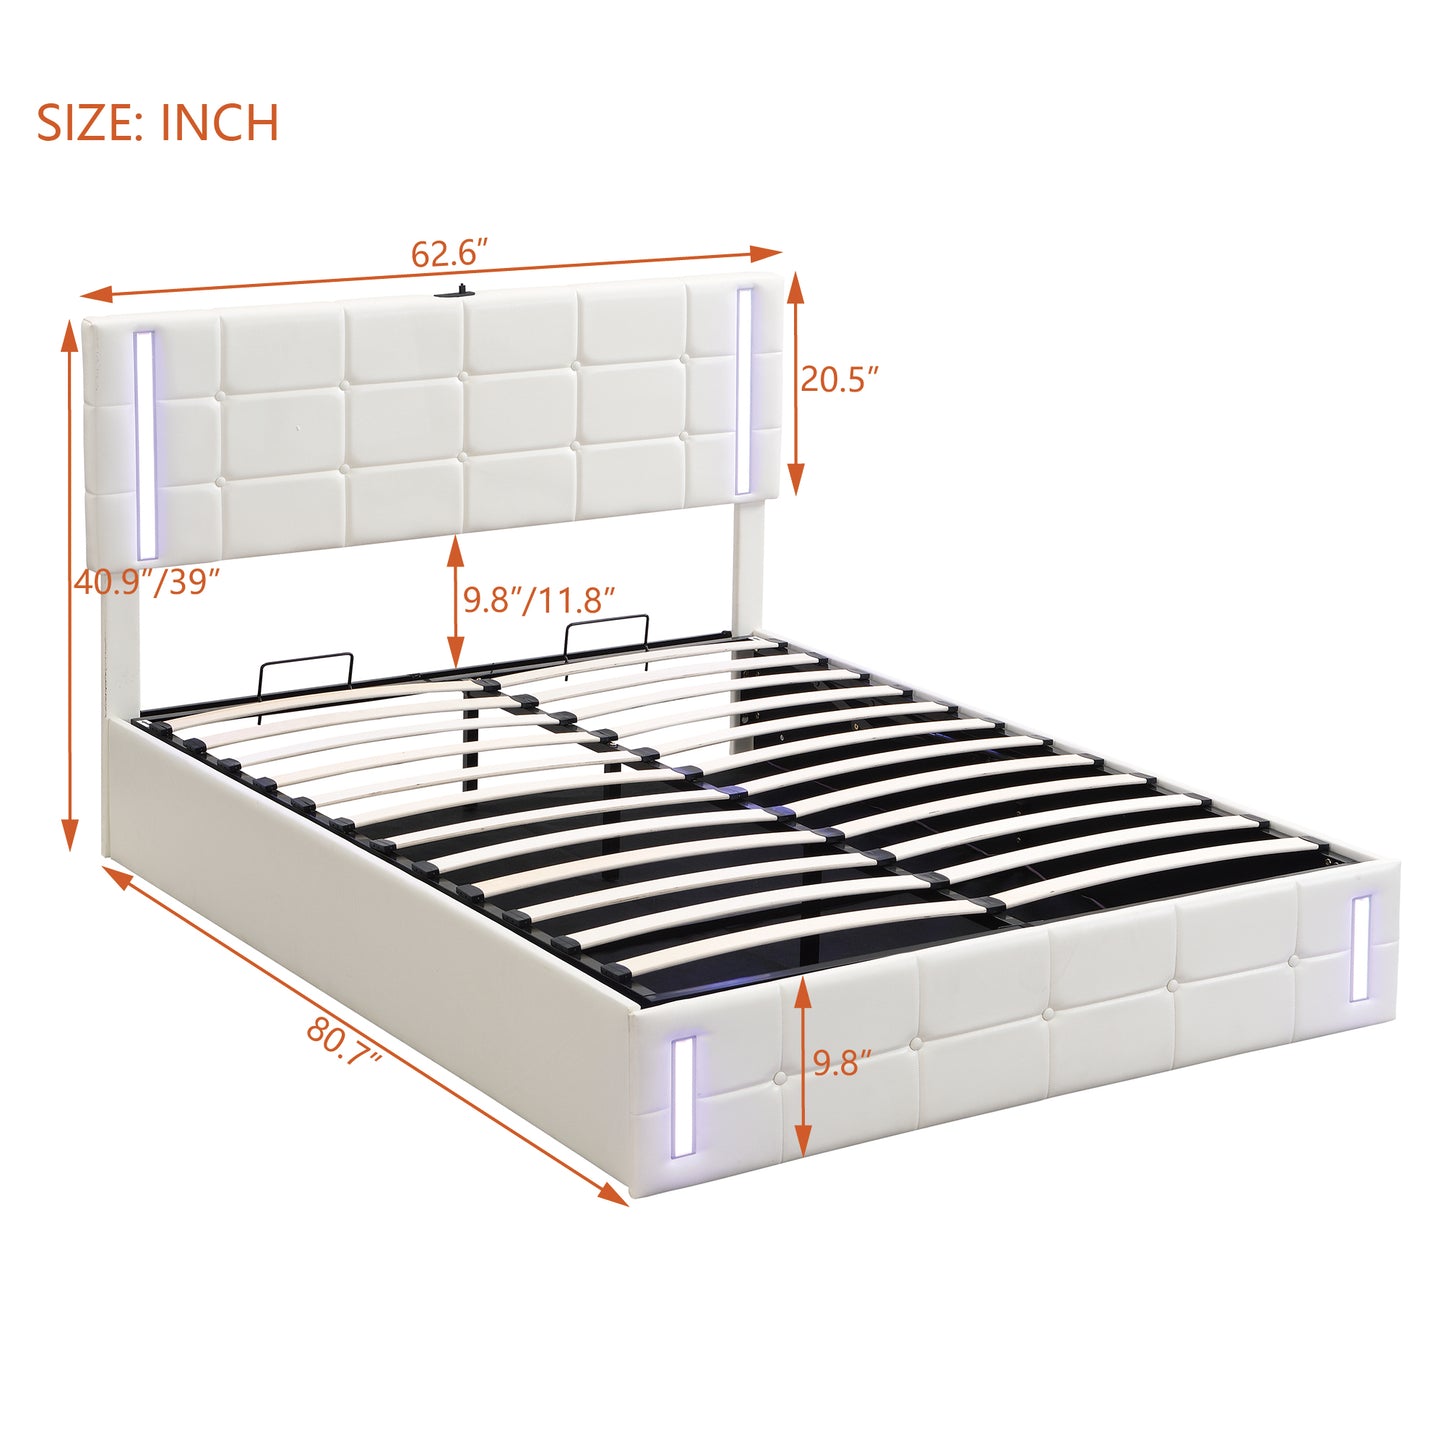 Queen Size Upholstered Bed with LED Lights,Hydraulic Storage System and USB Charging Station,White